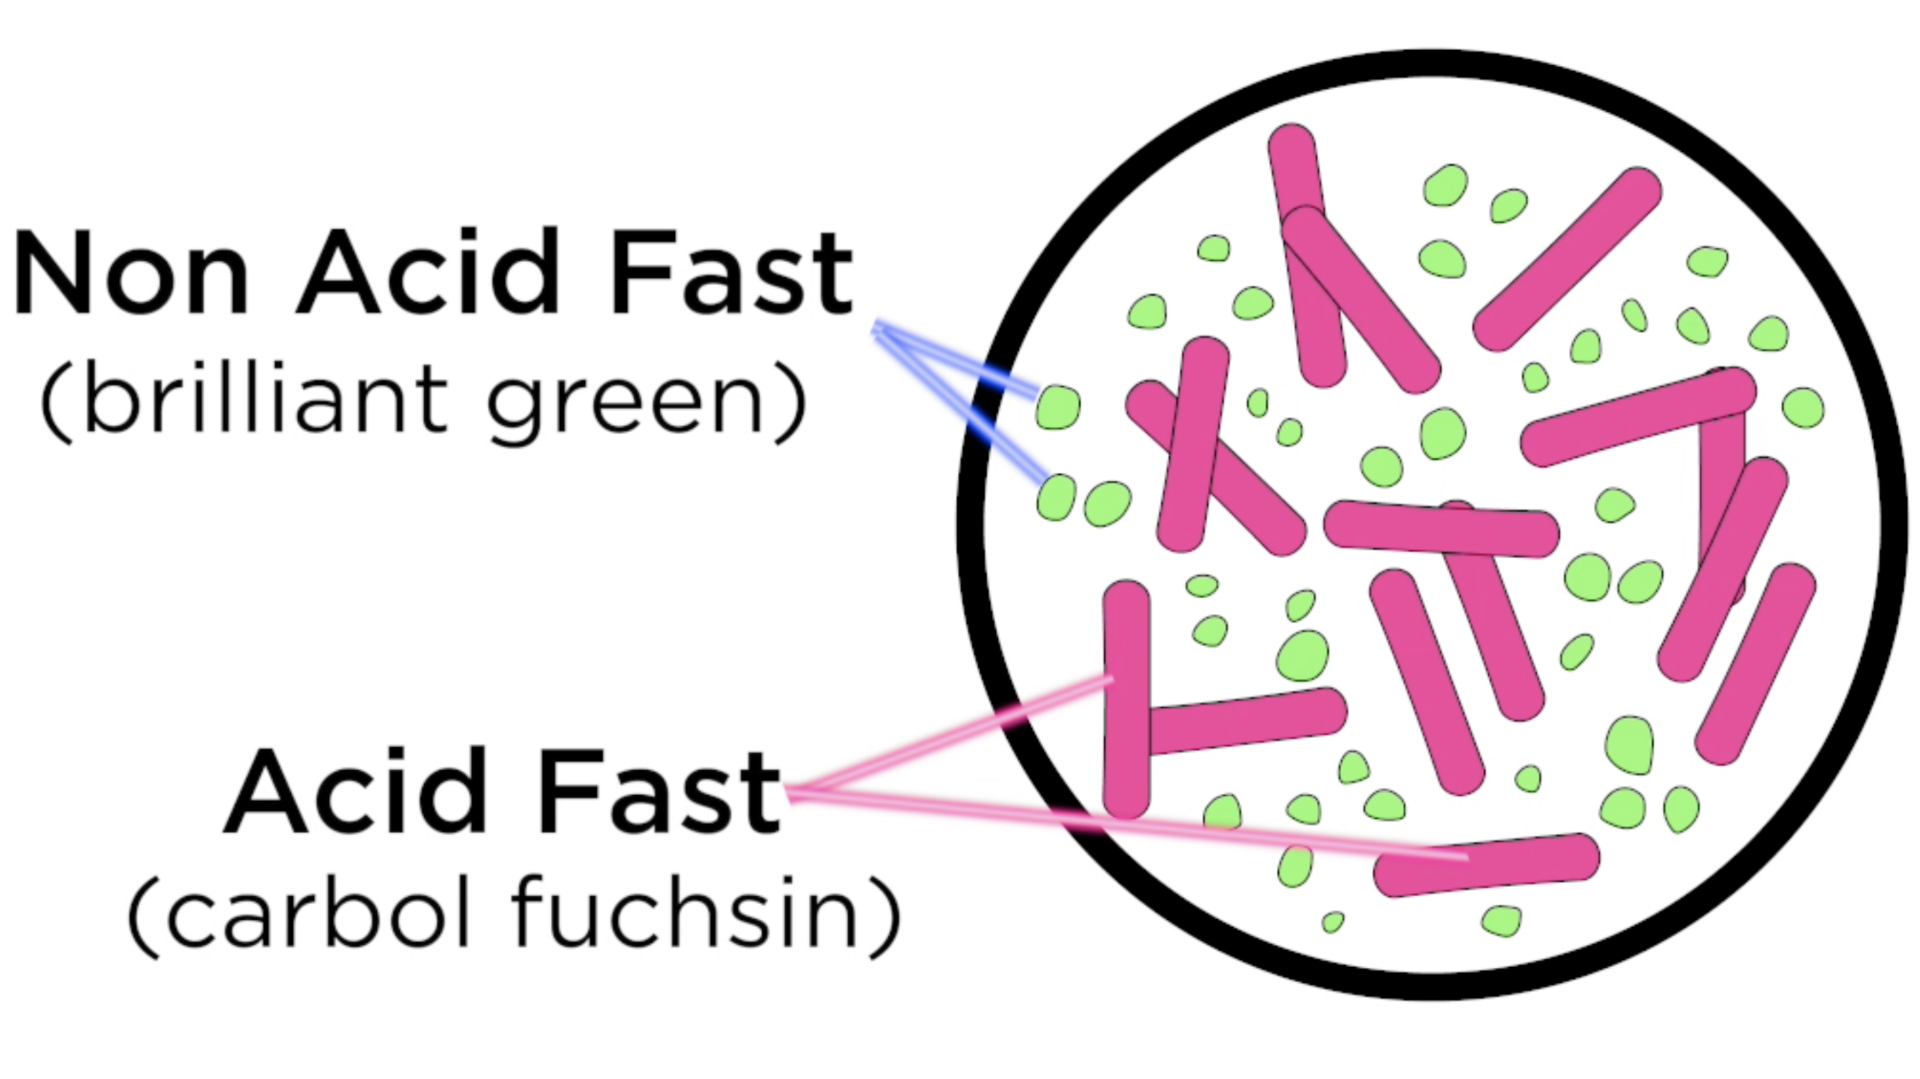 non_acid_acid_fast_stain_infographic_green_dots_